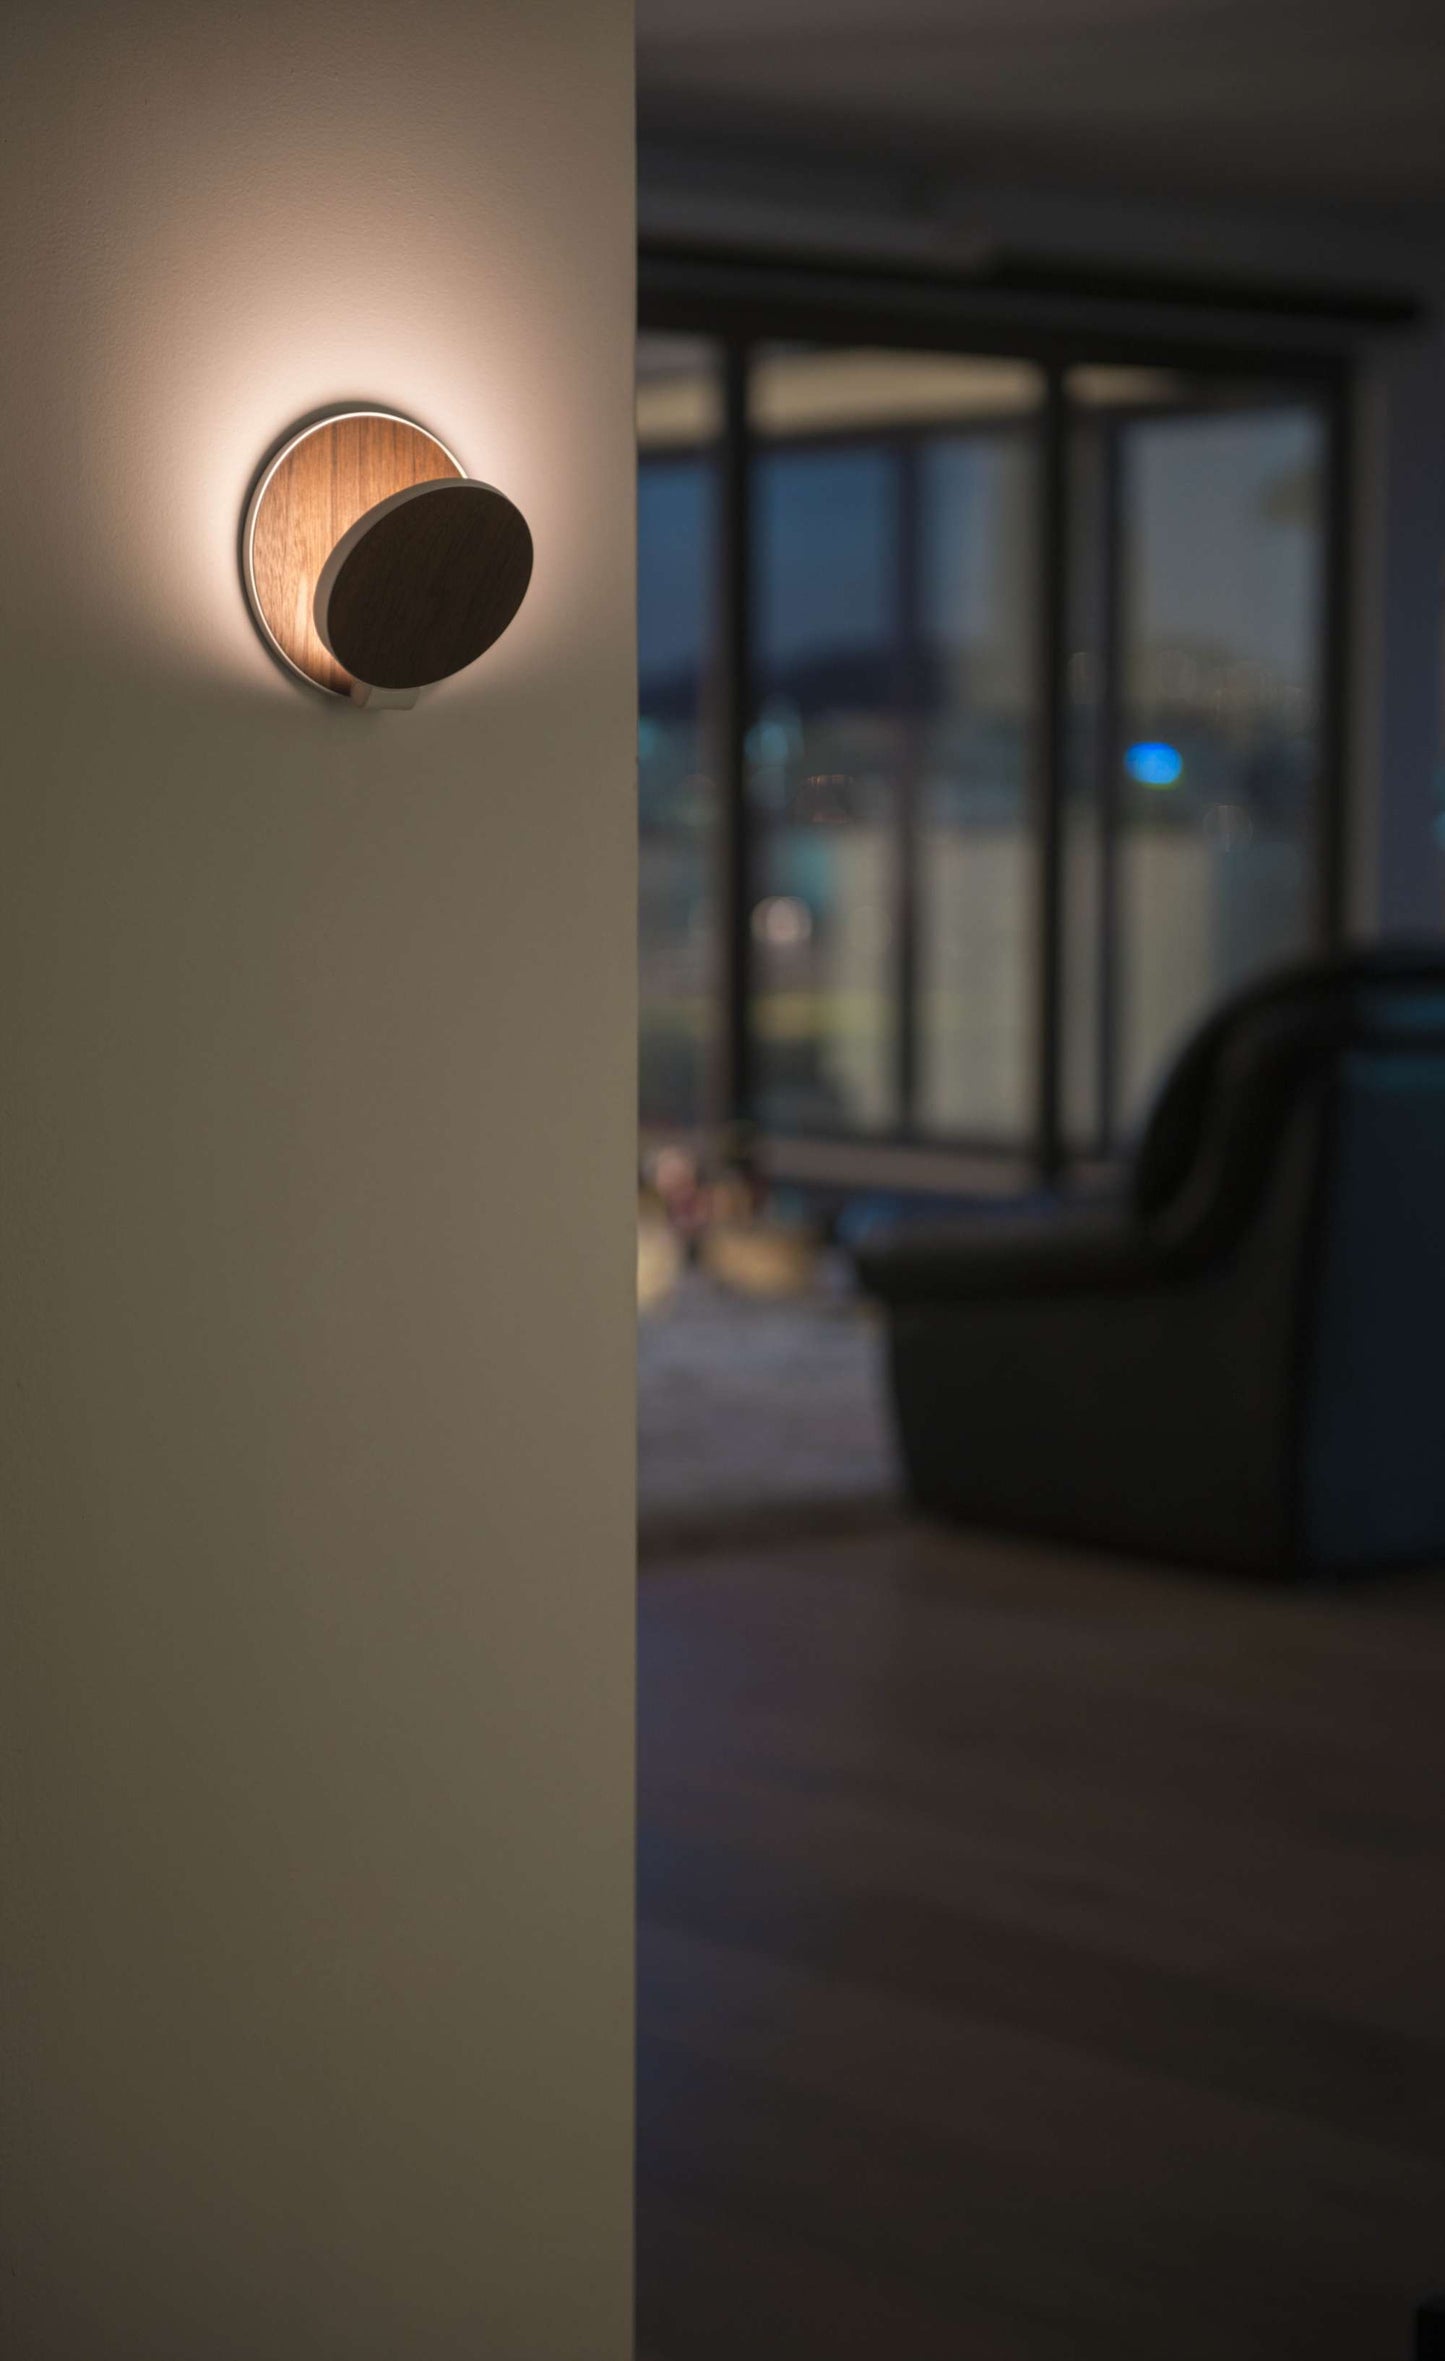 Koncept Gravy LED Wall Sconce - Plug-in